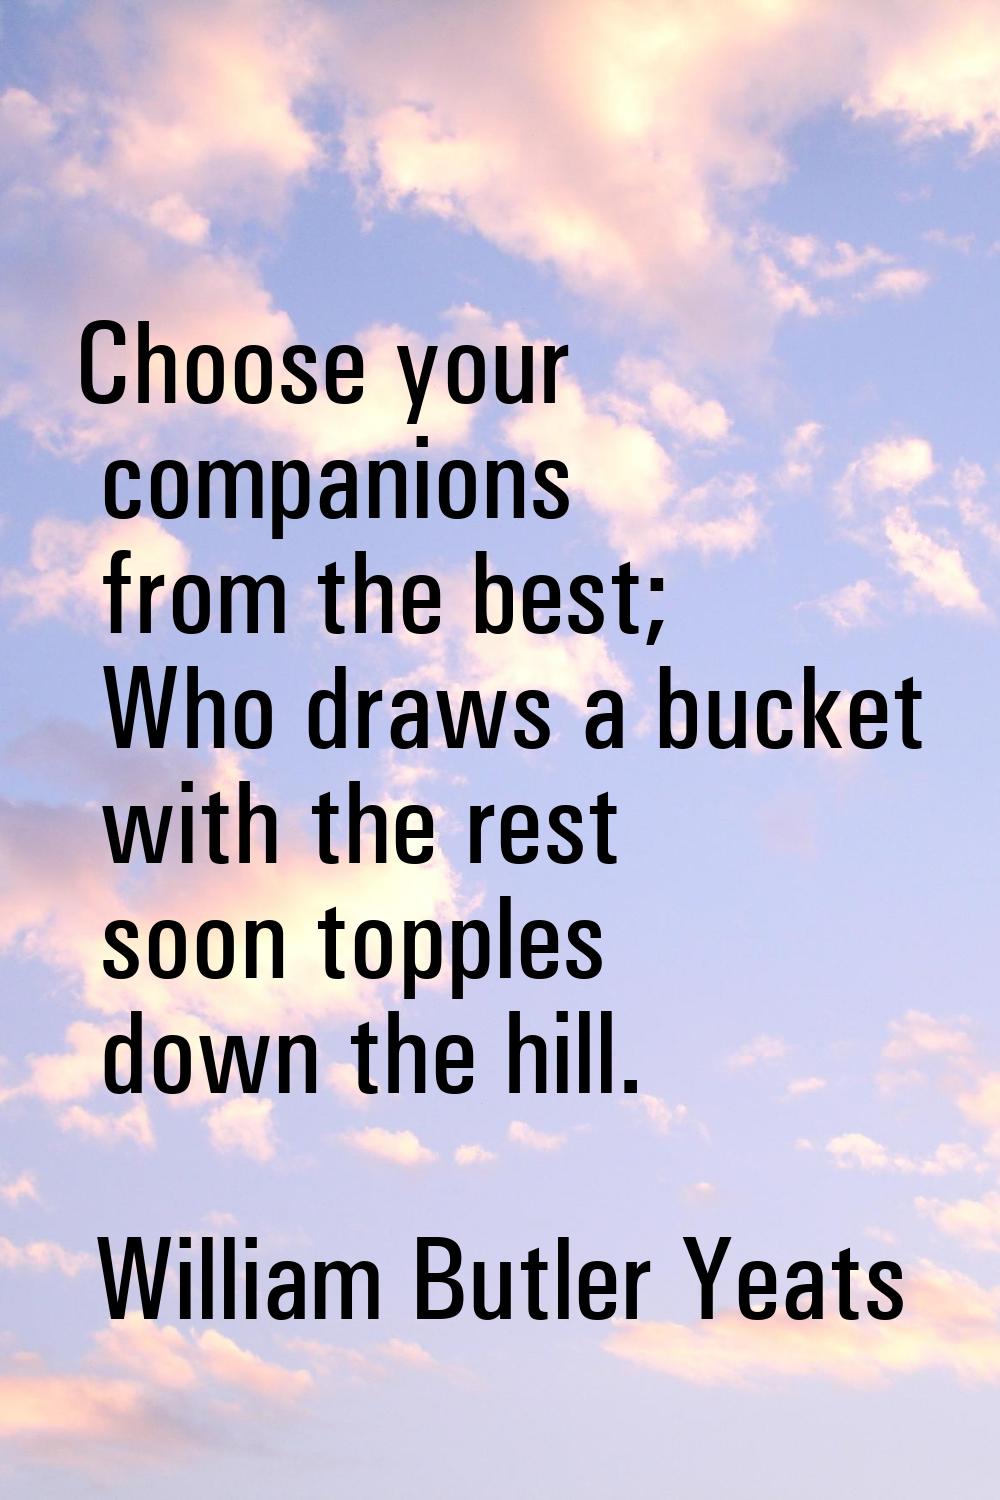 Choose your companions from the best; Who draws a bucket with the rest soon topples down the hill.